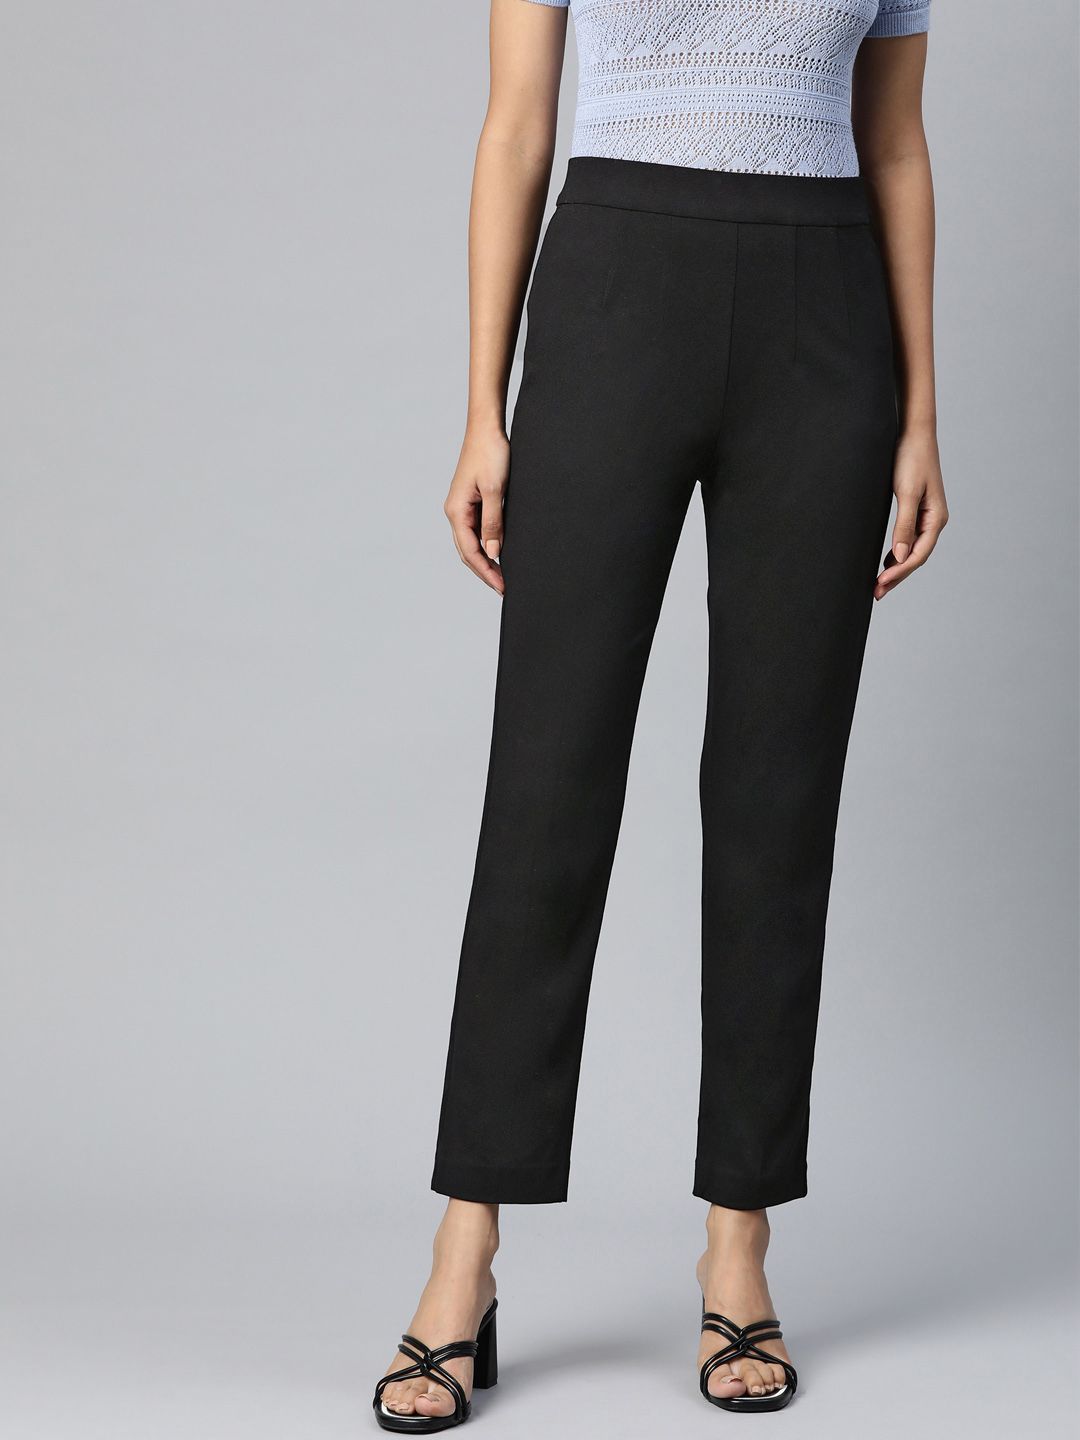 Marks & Spencer Women Black Solid Slim Fit Trousers Price in India